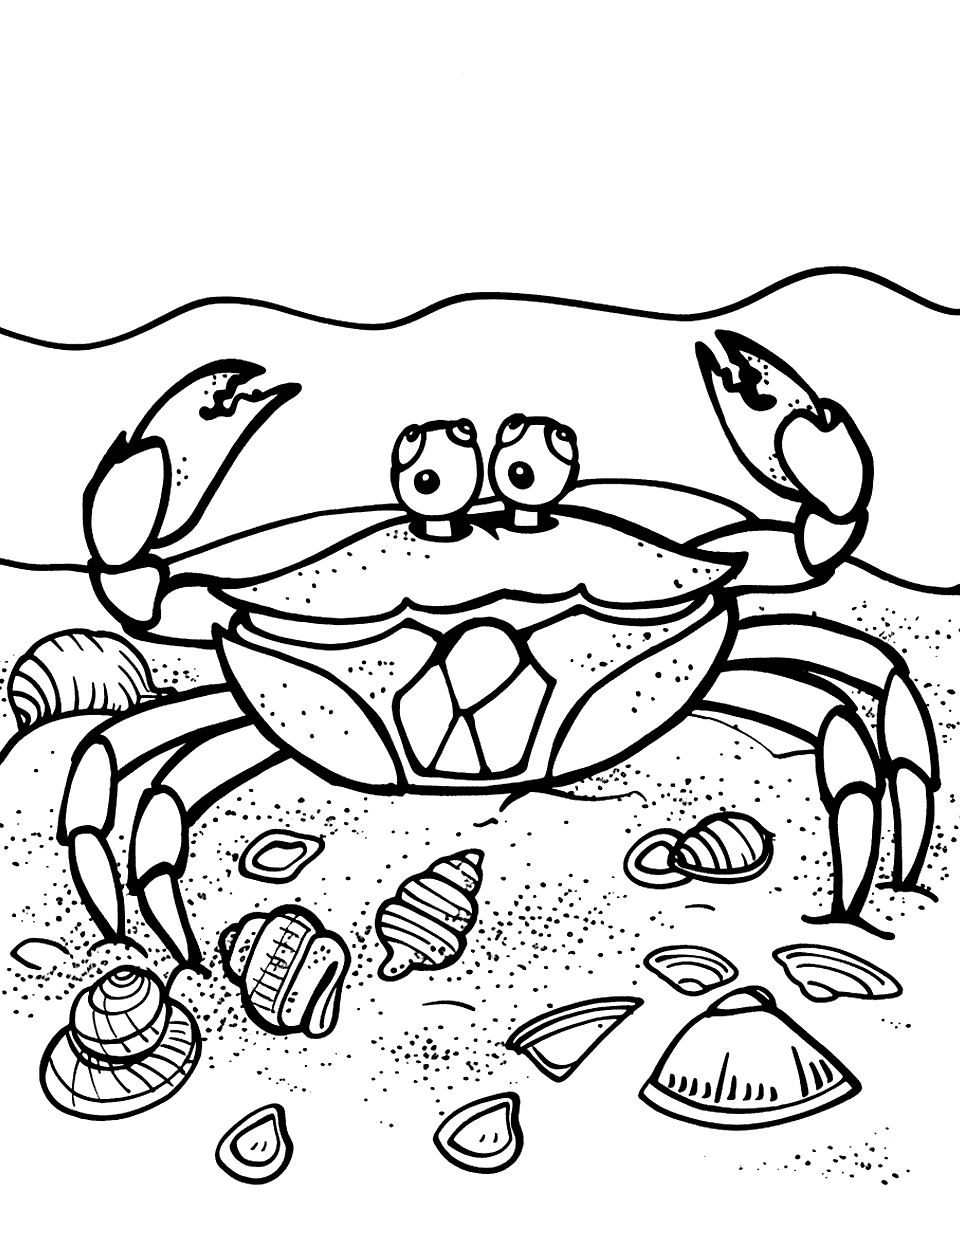 Seashell Collector Crab Coloring Page - A detailed scene of a crab examining a collection of seashells scattered on the sand.